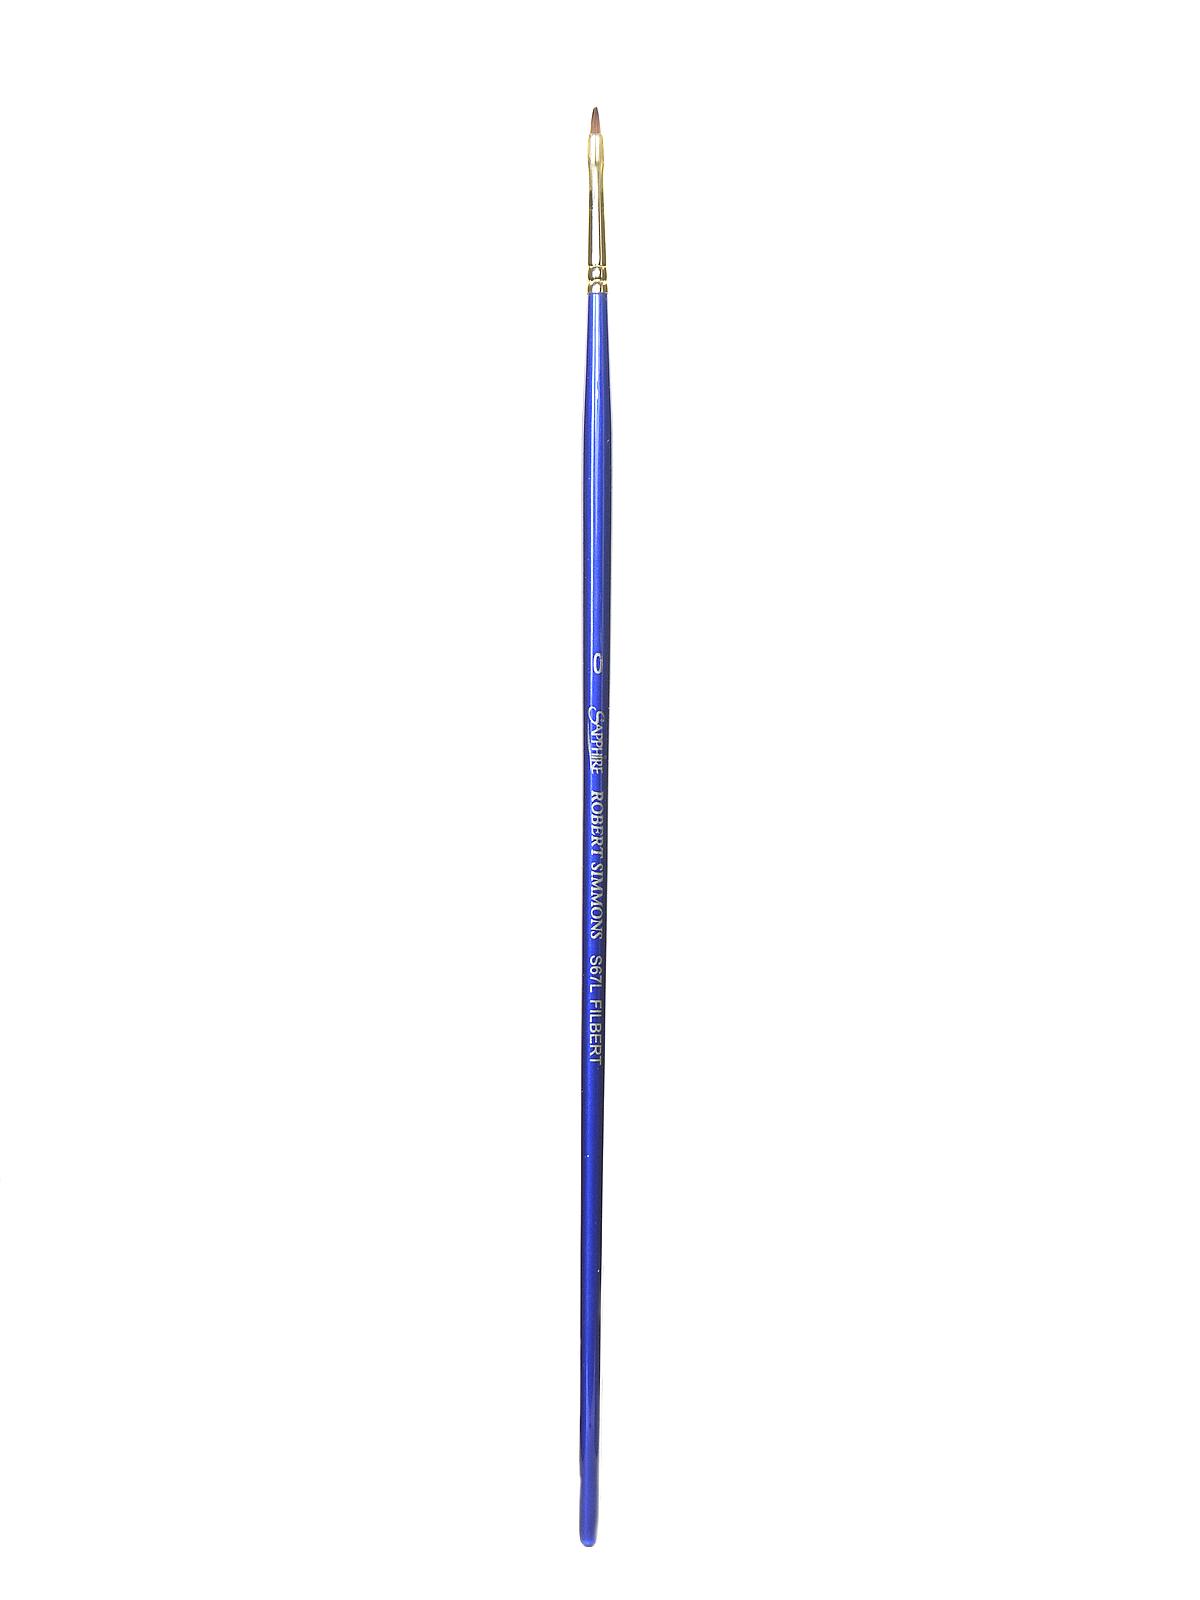 Sapphire Series Synthetic Brushes Long Handle 0 Filbert